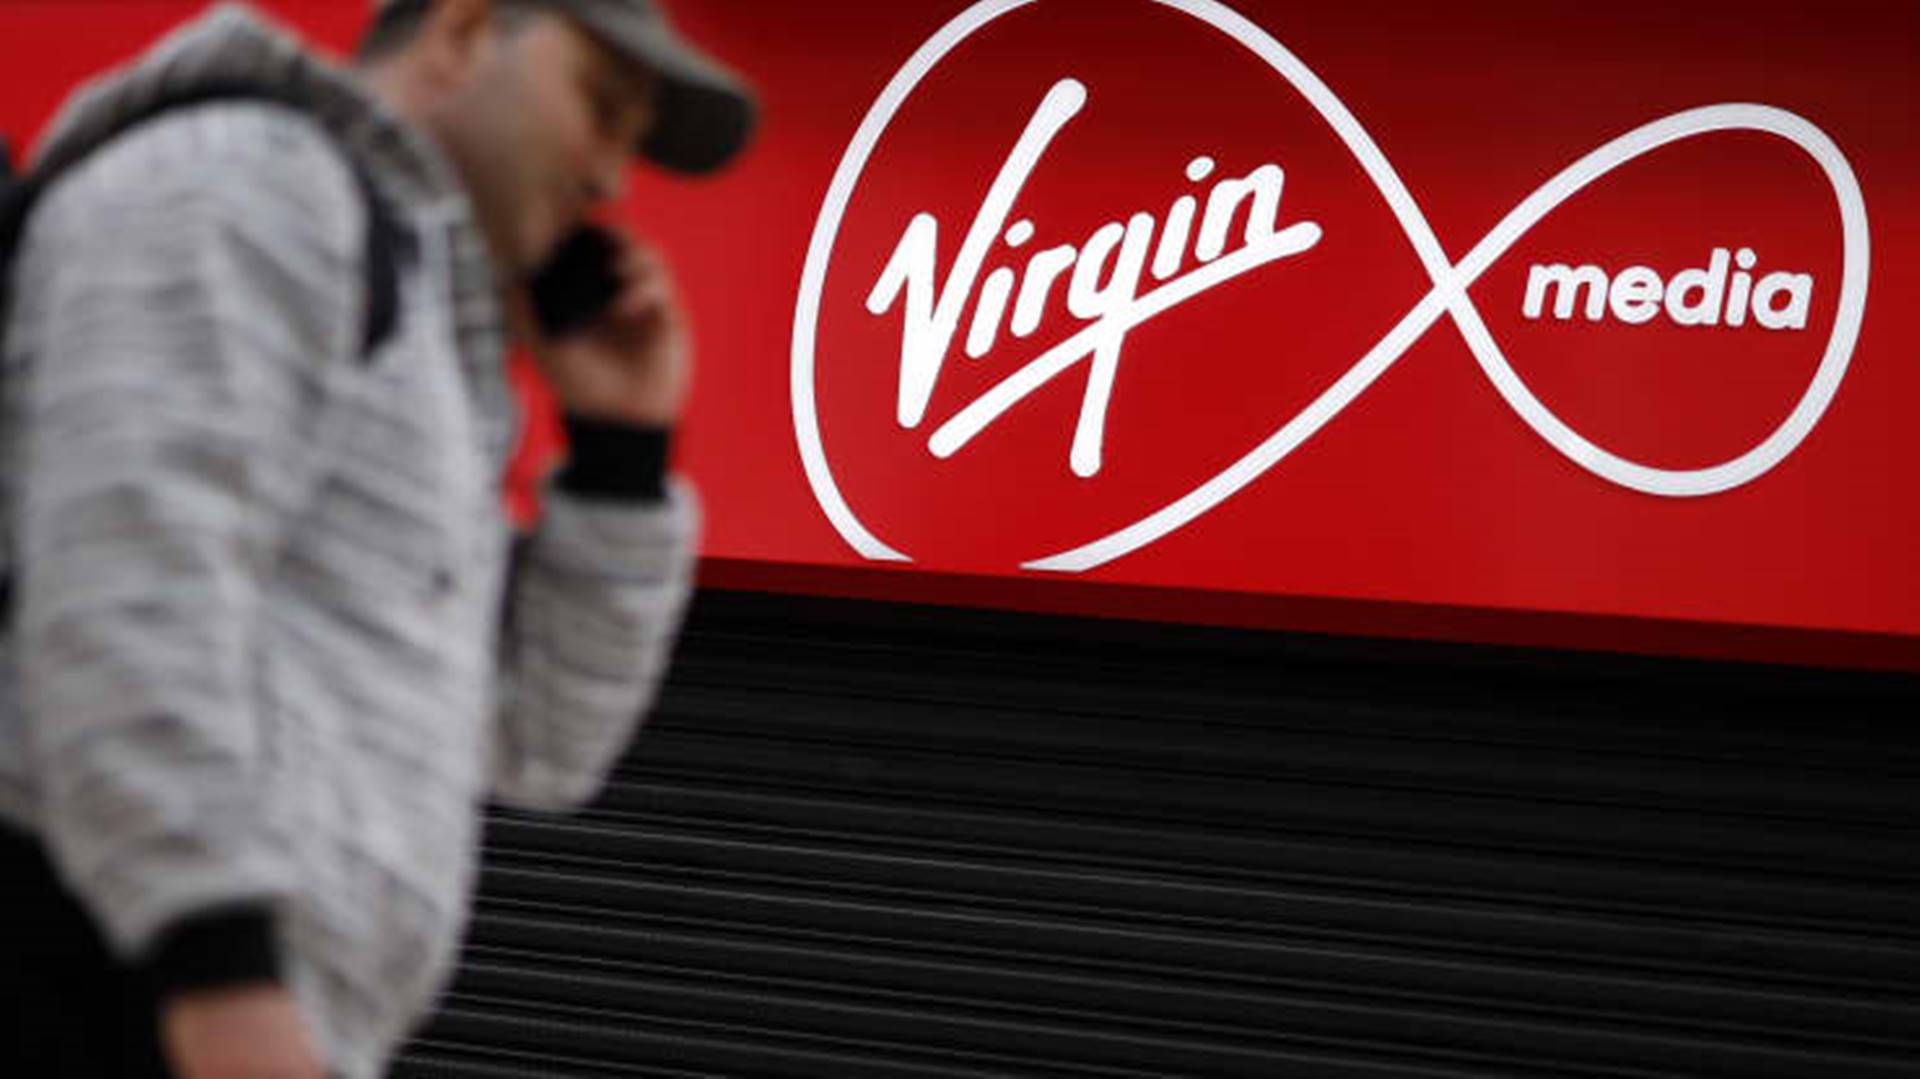 Virgin and O2′s $44 billion telecoms merger cleared by UK competition watchdog